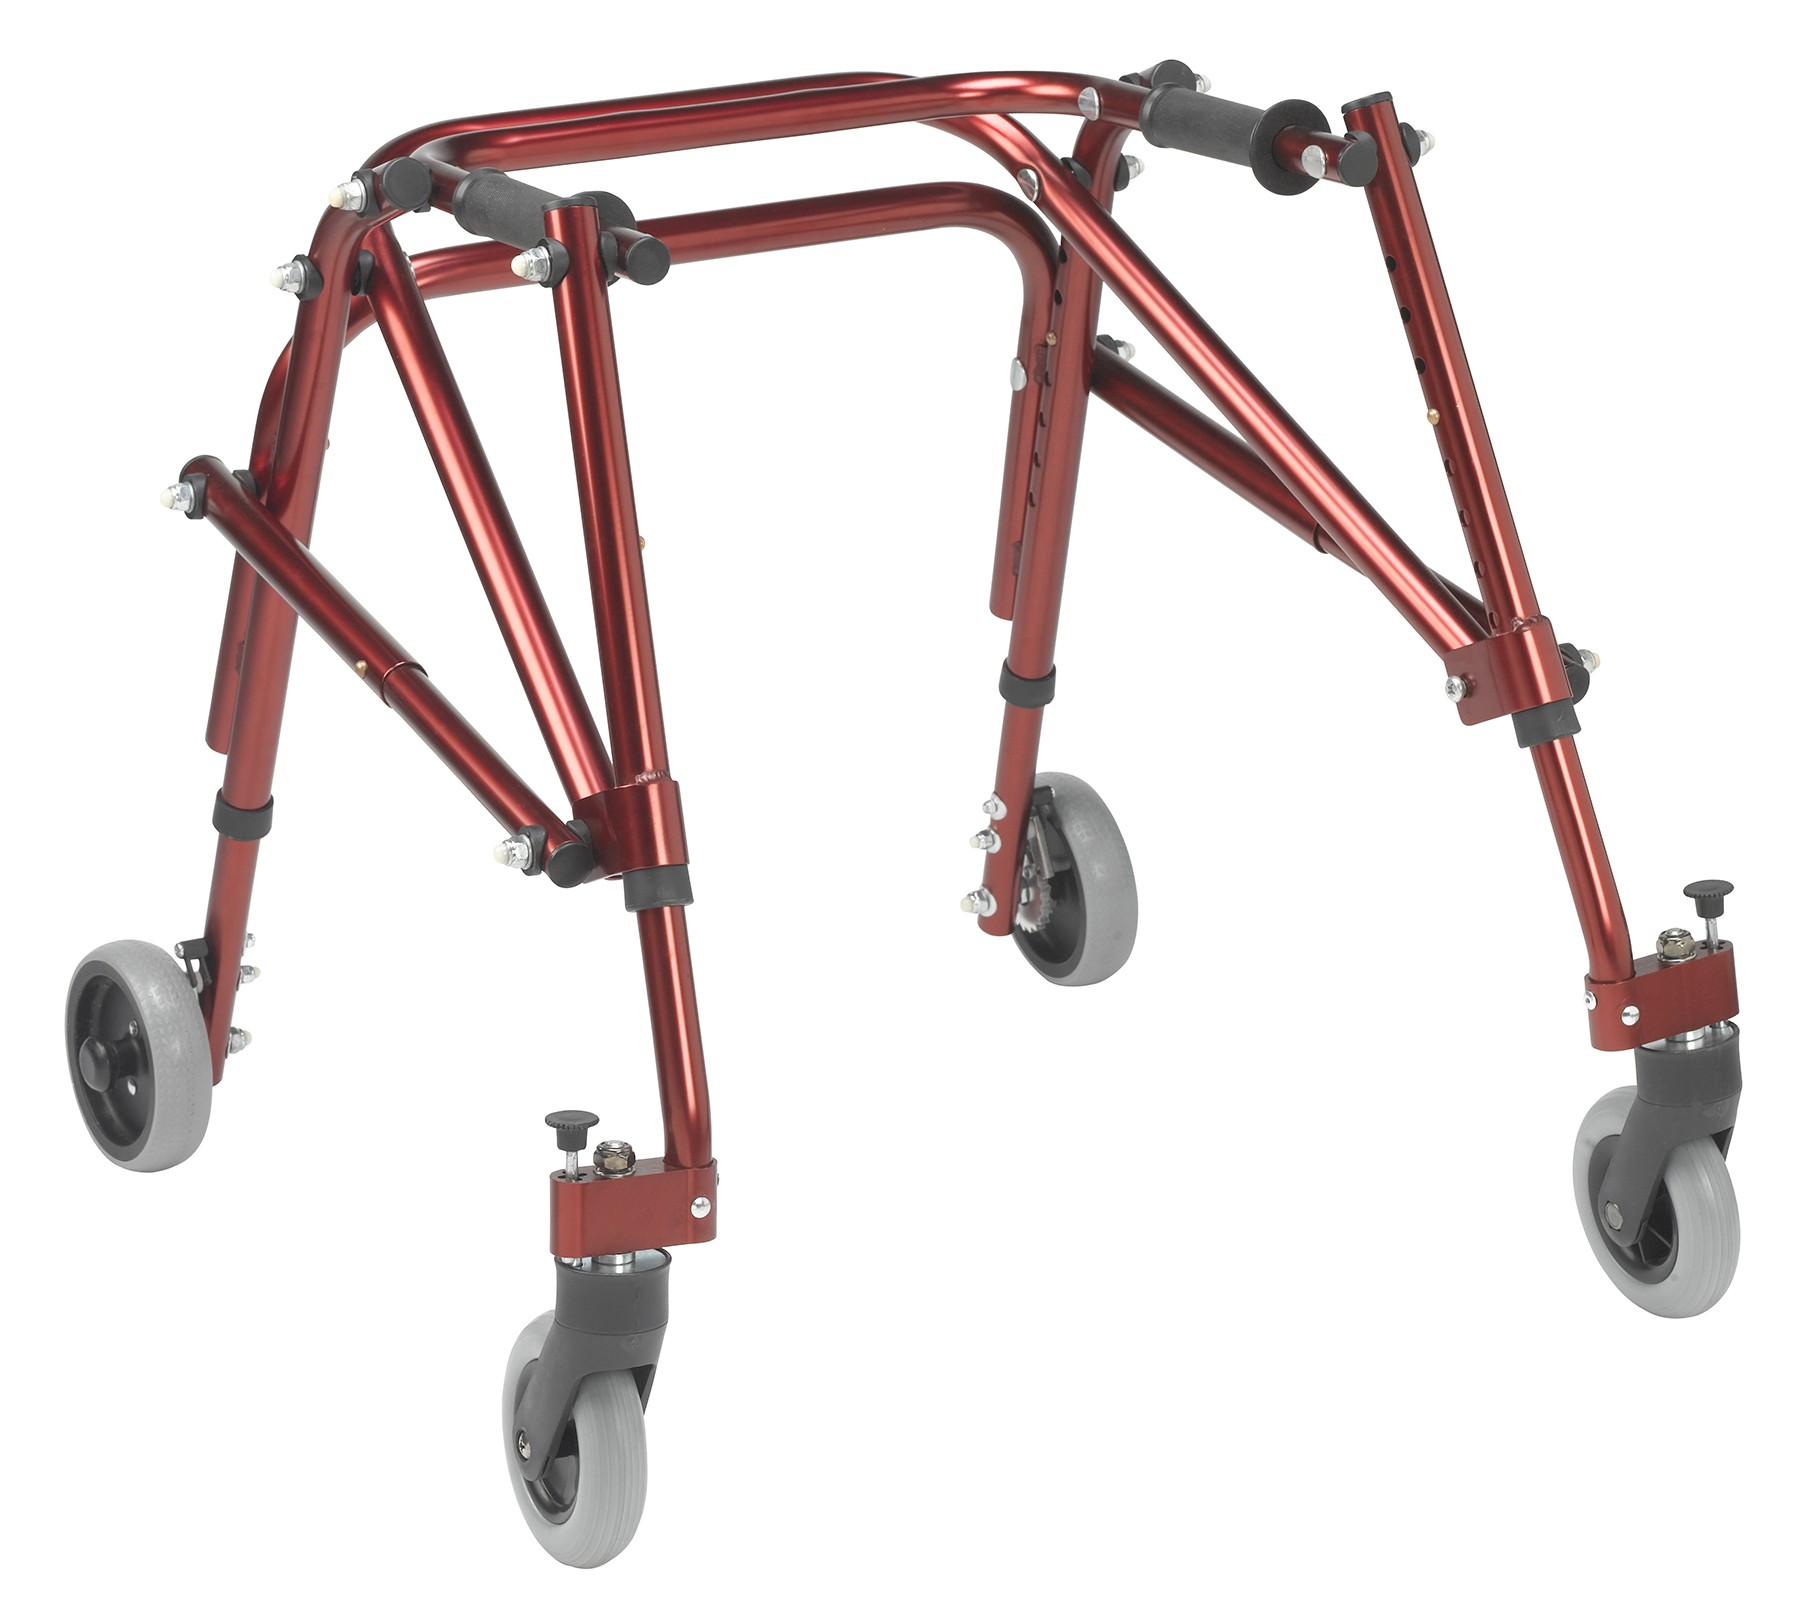 Wheeled Walkers Products, Supplies and Equipment